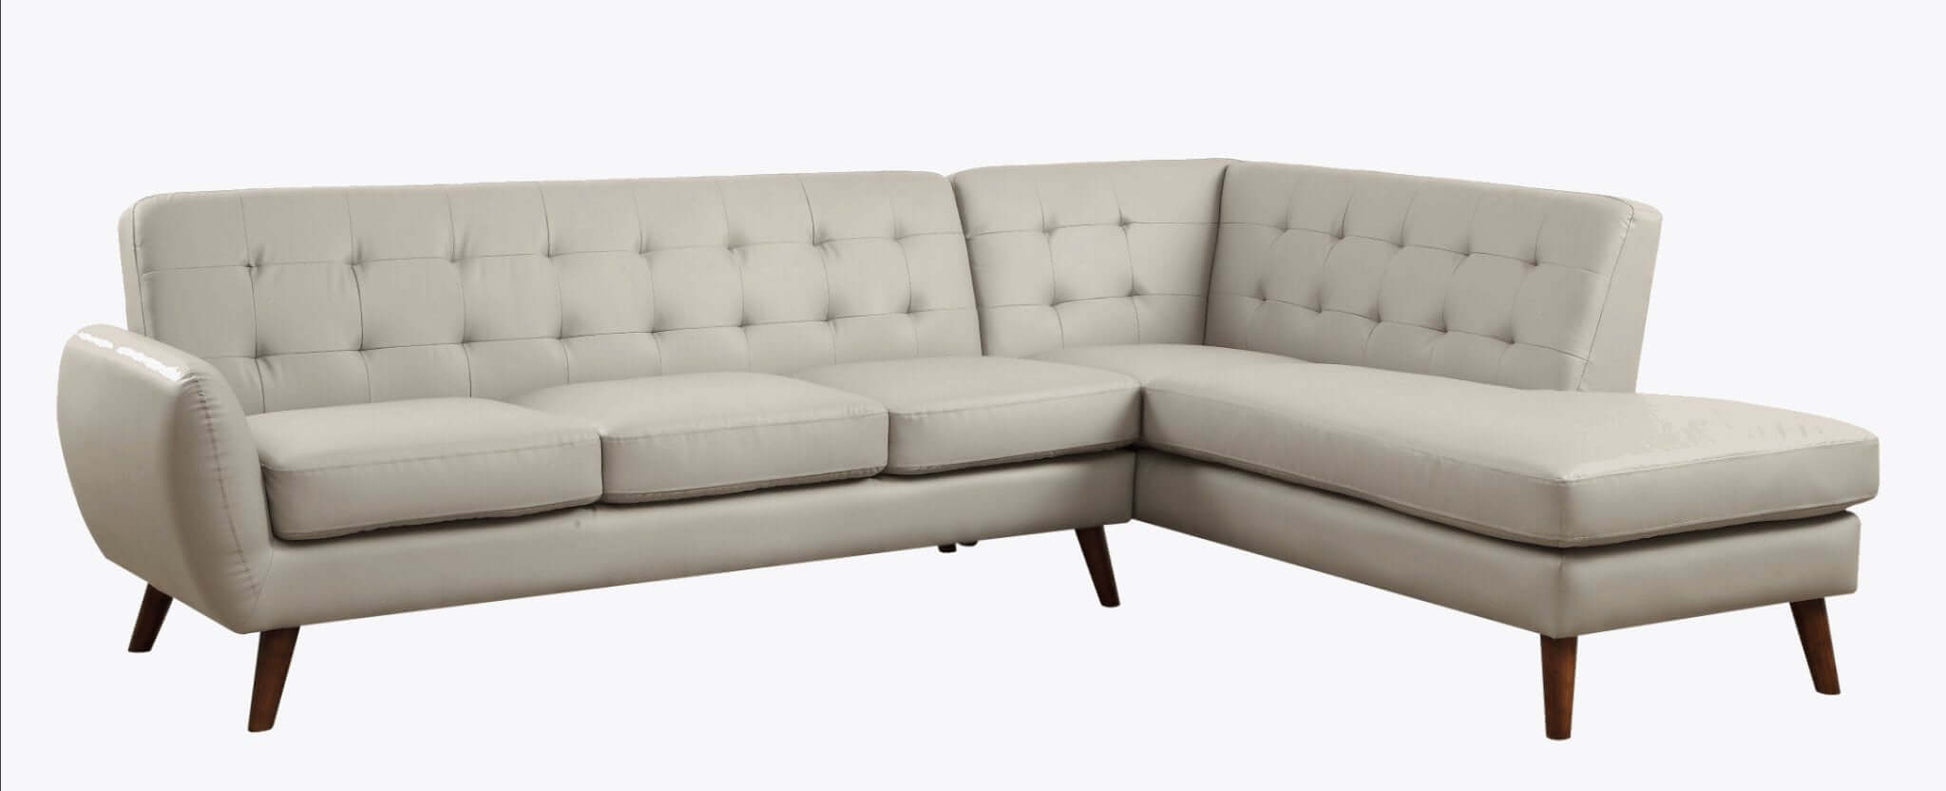 MCM Tufted L-Shape Sectional Sofa Right Facing Chaise 111" - Revel Sofa 